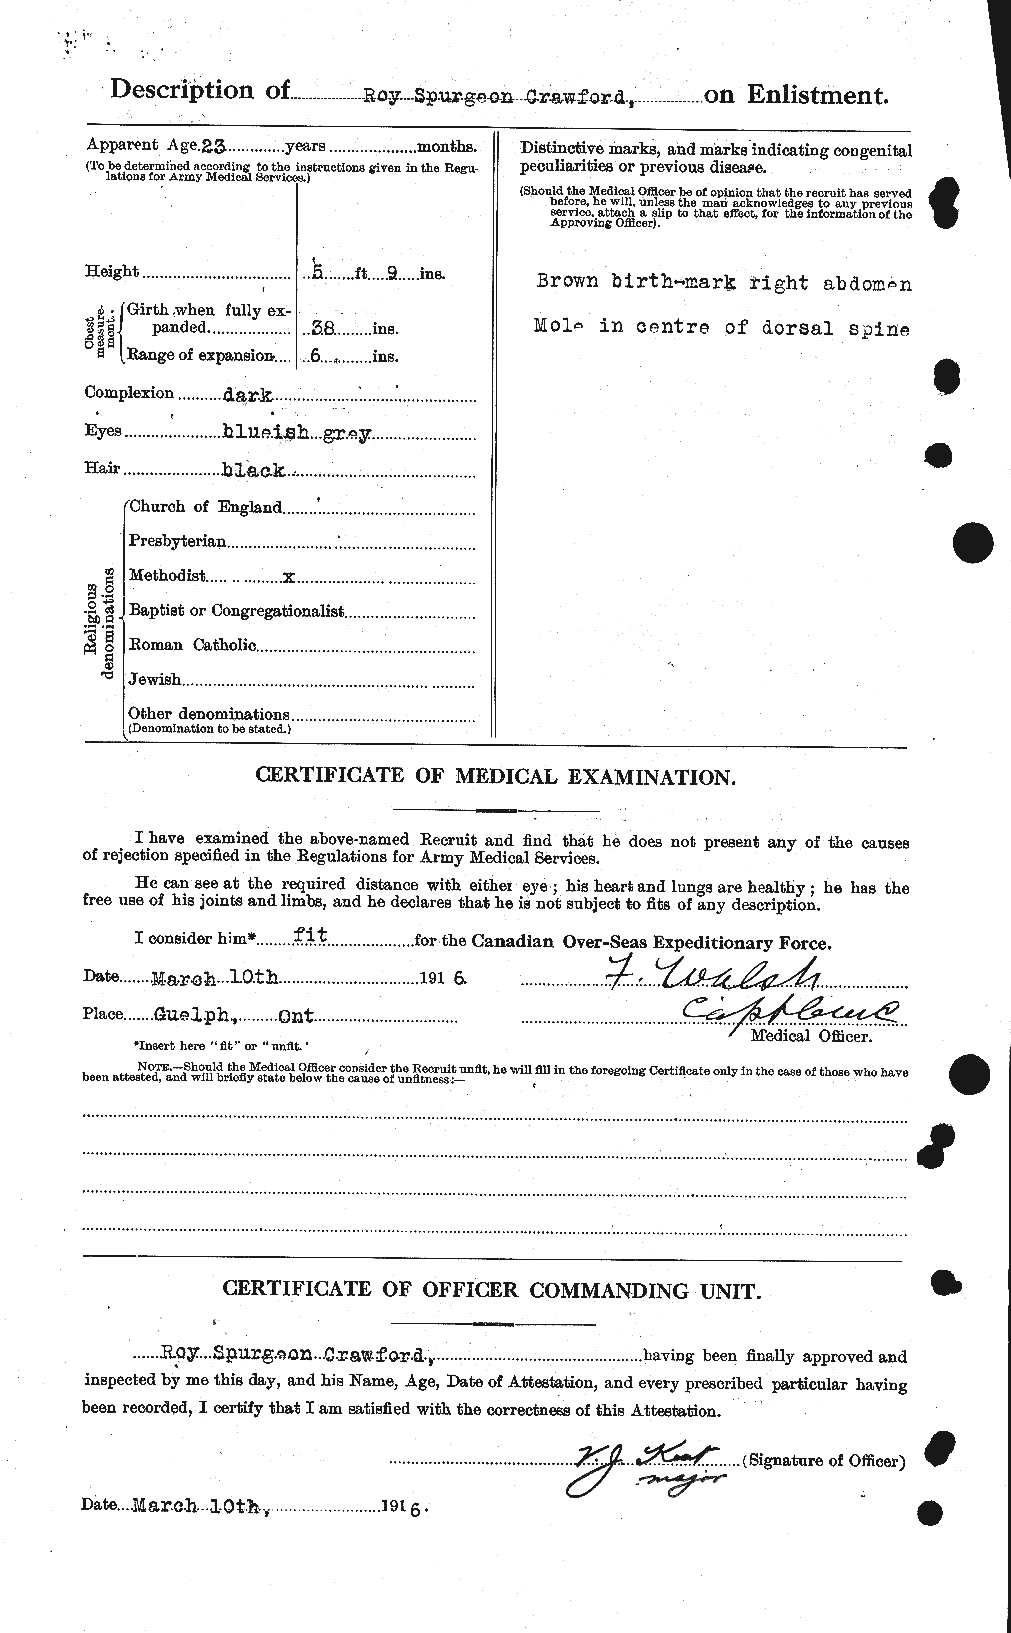 Personnel Records of the First World War - CEF 061385b